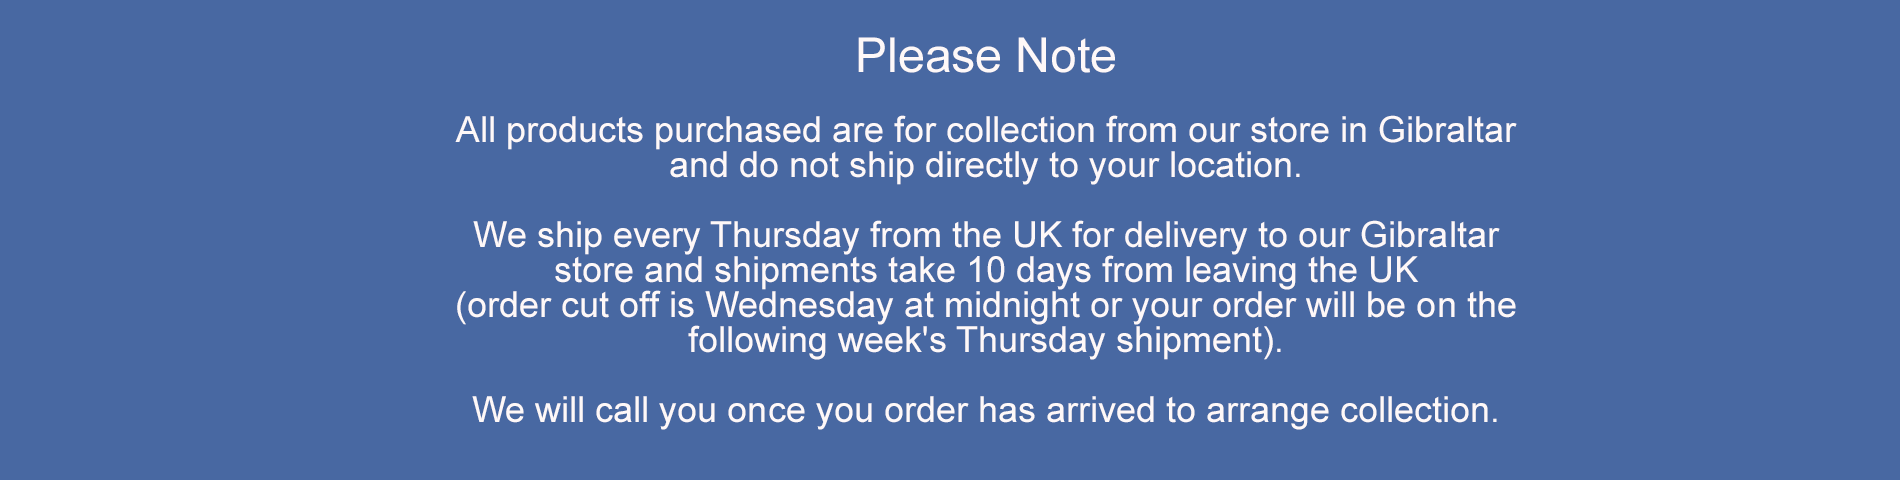 Shipping notice